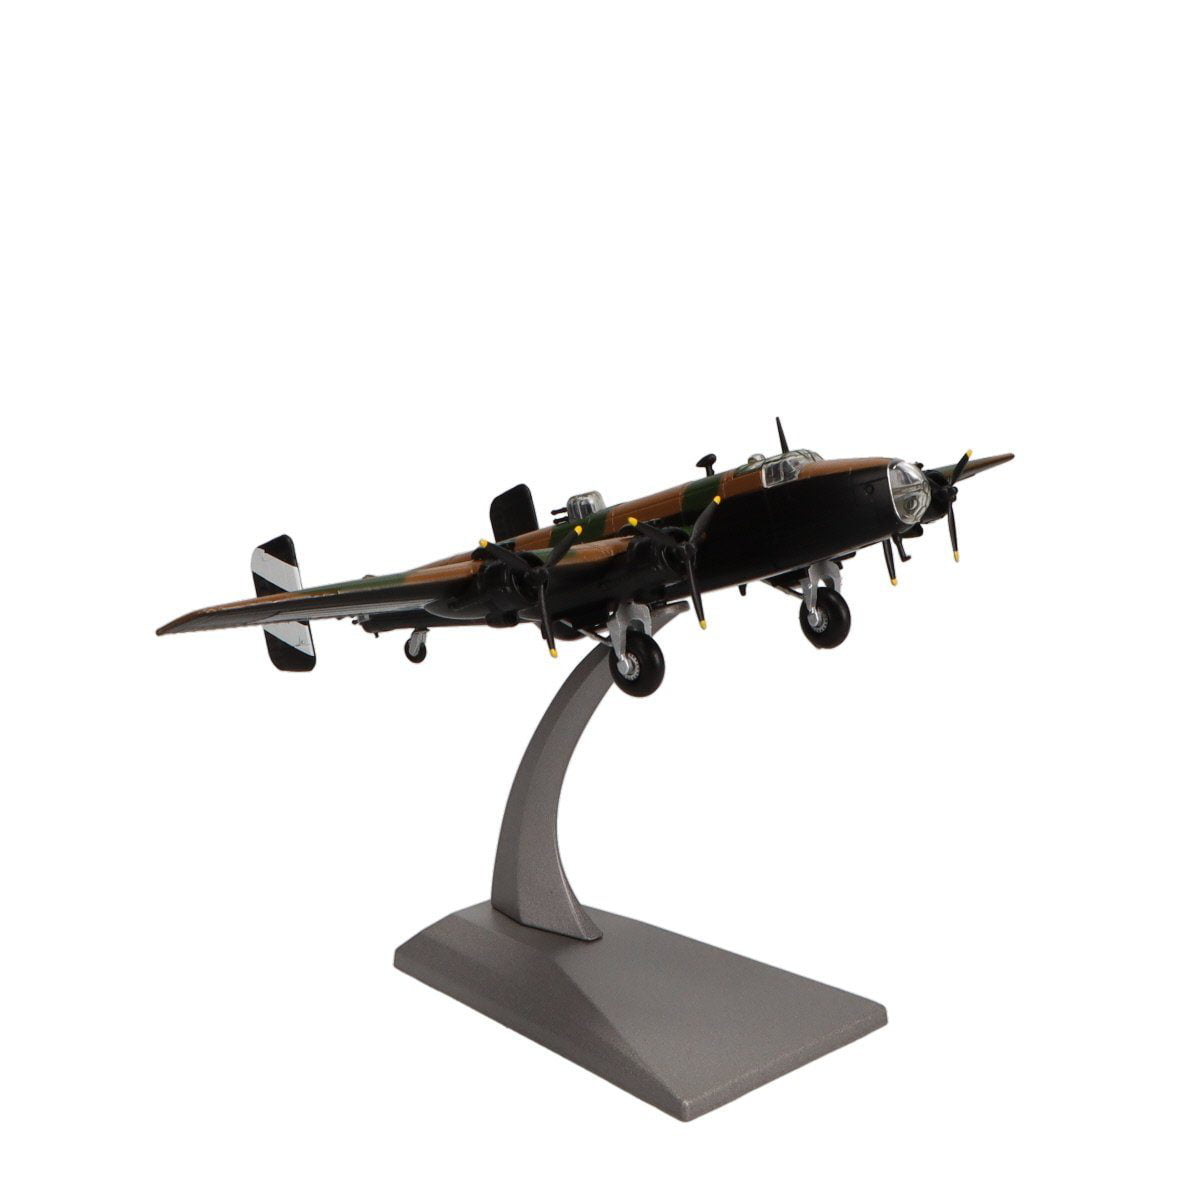 Details about   1:144 Scale UK Handley Page Halifax WWII Bomber Fighter Diecast Aircraft Model